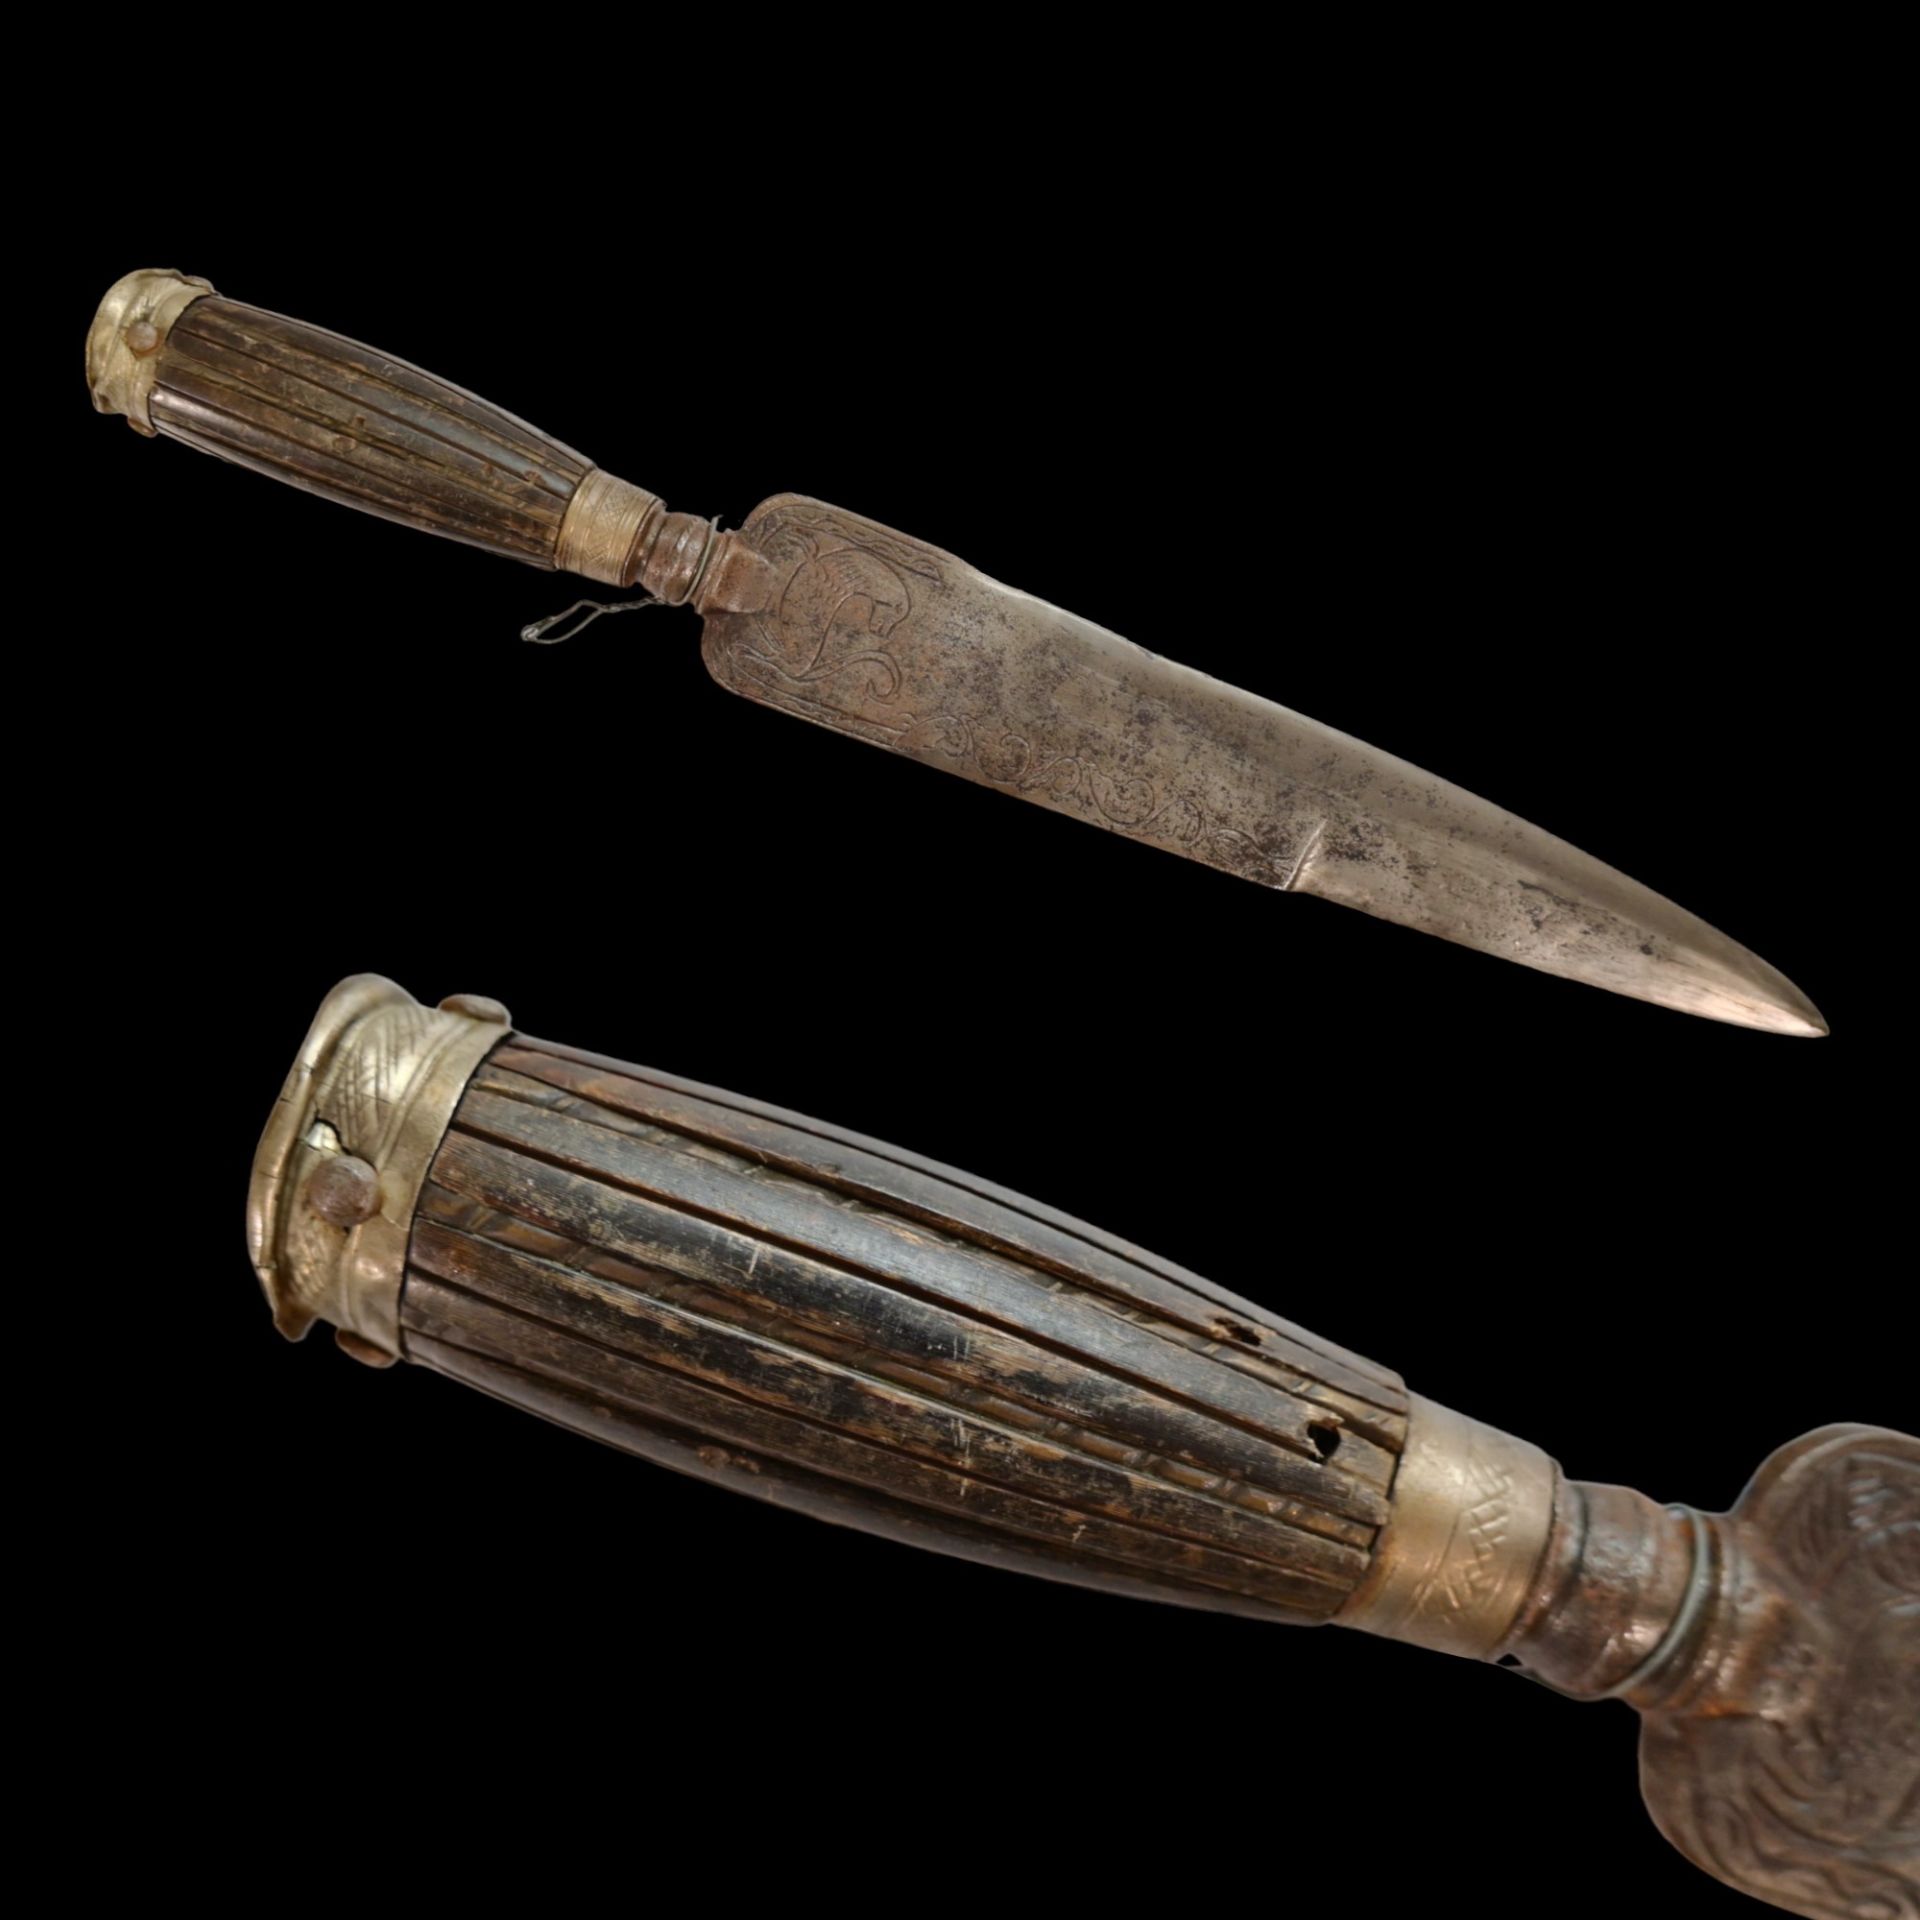 A Italian hunting knife, late 18th C., with engraving on the blade, horn handle in a silver mounting